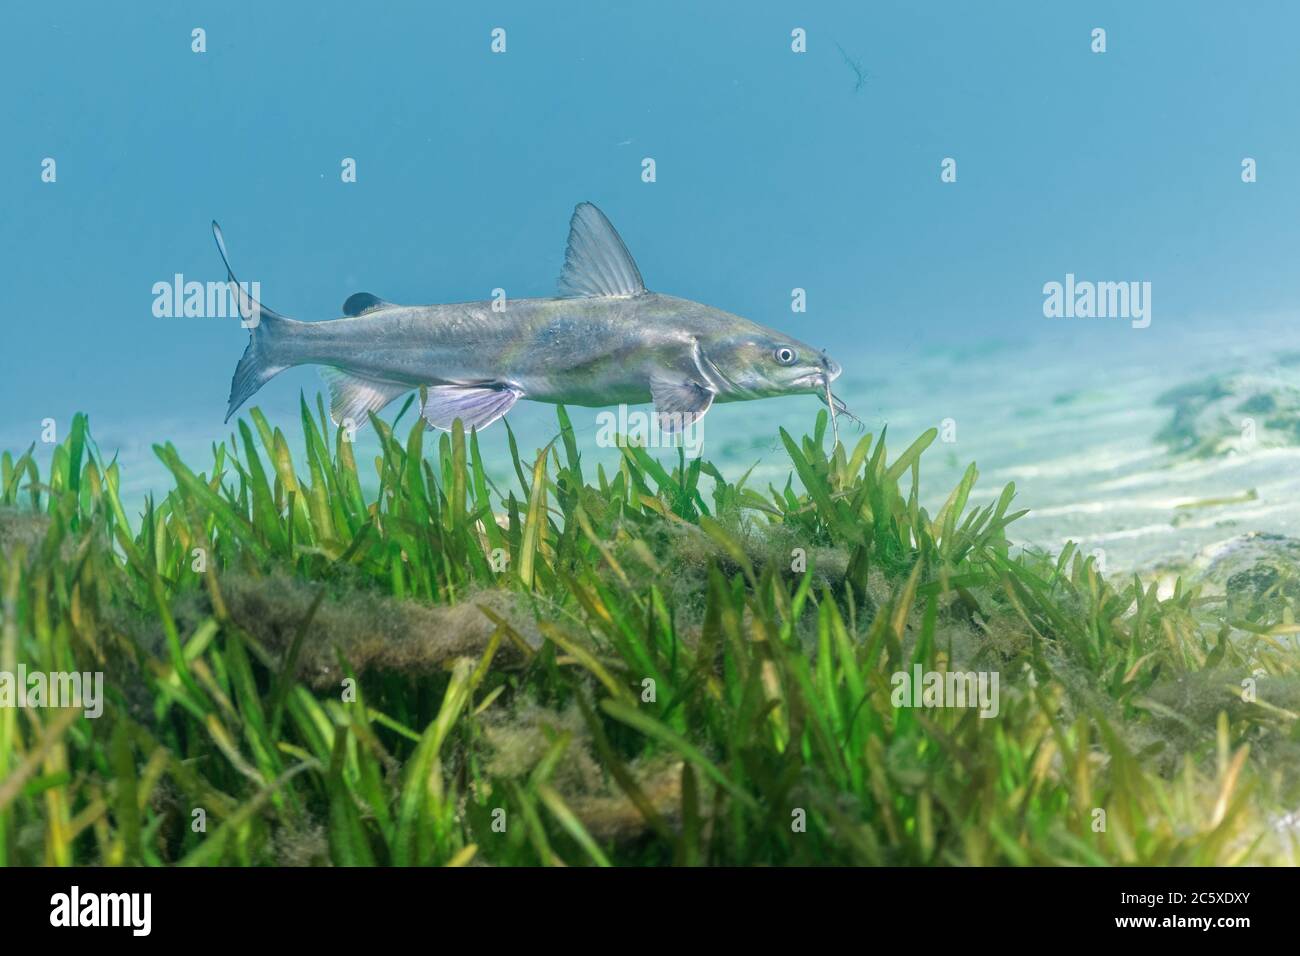 Florida Sea Grass Underwater High Stock Photography and Images - Alamy